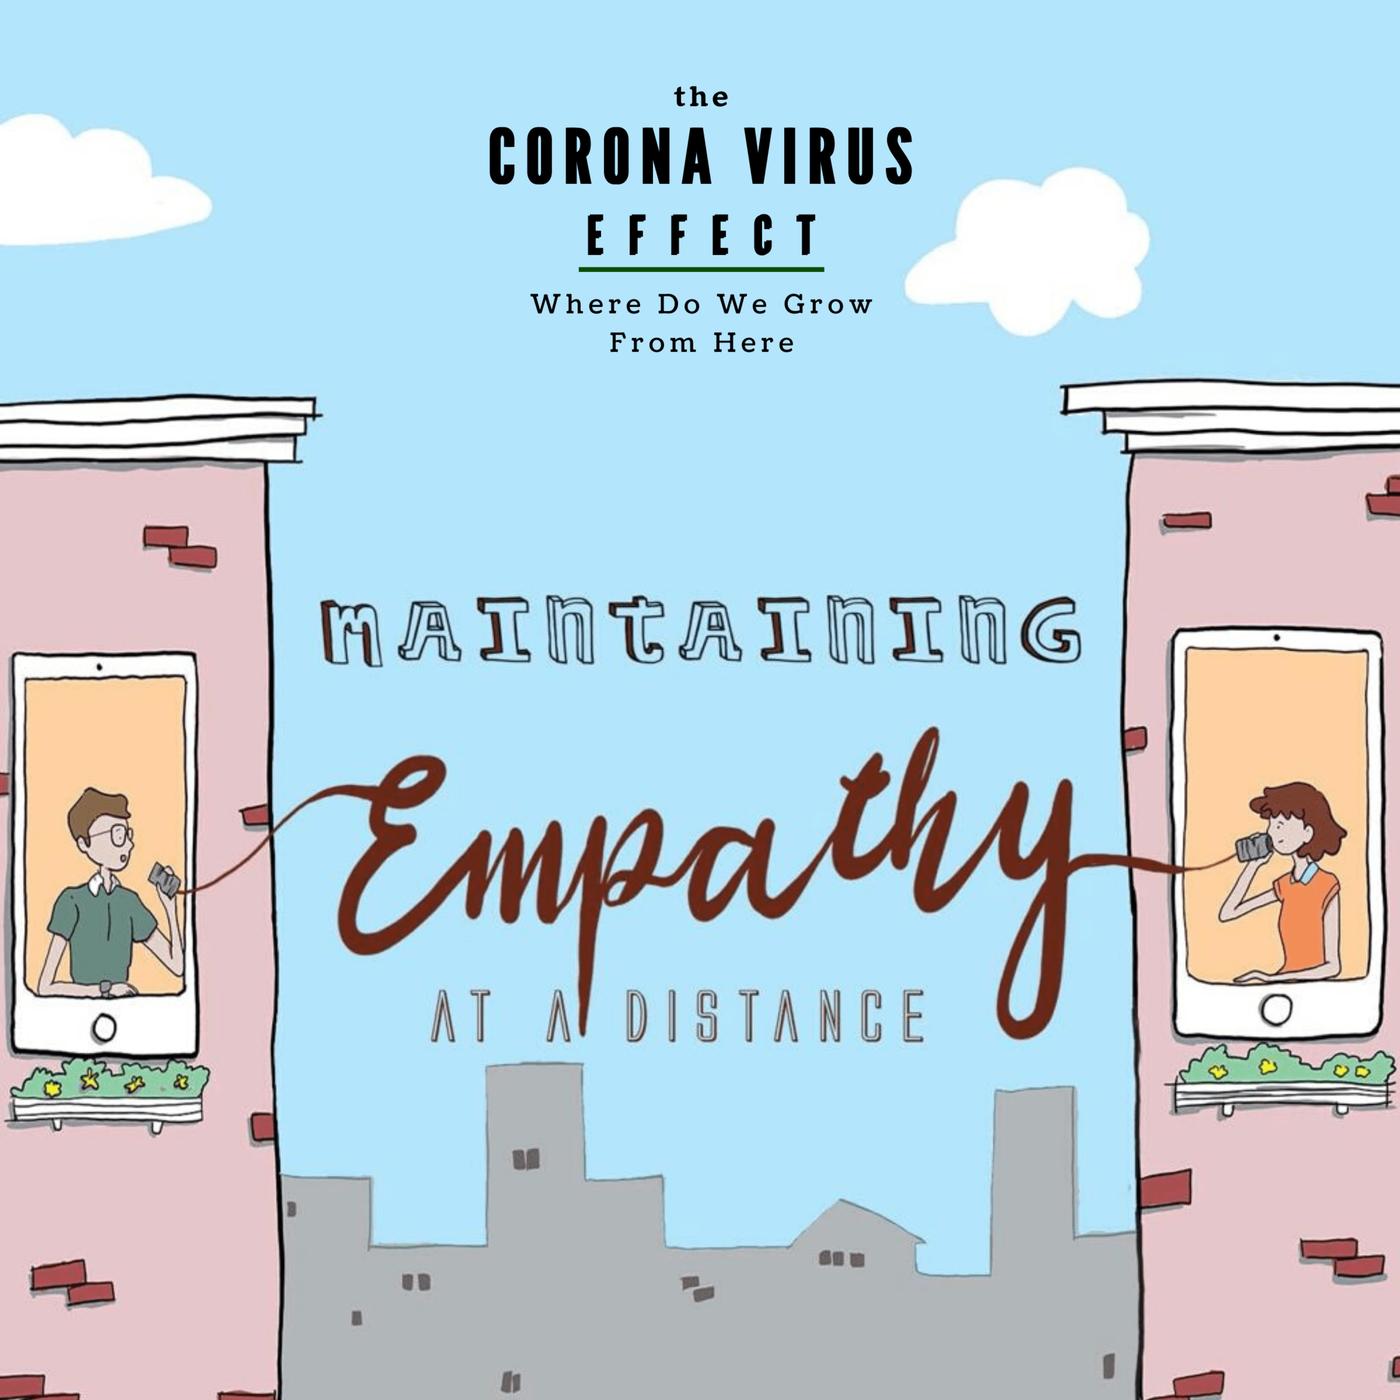 4. Maintaining Empathy at a Distance